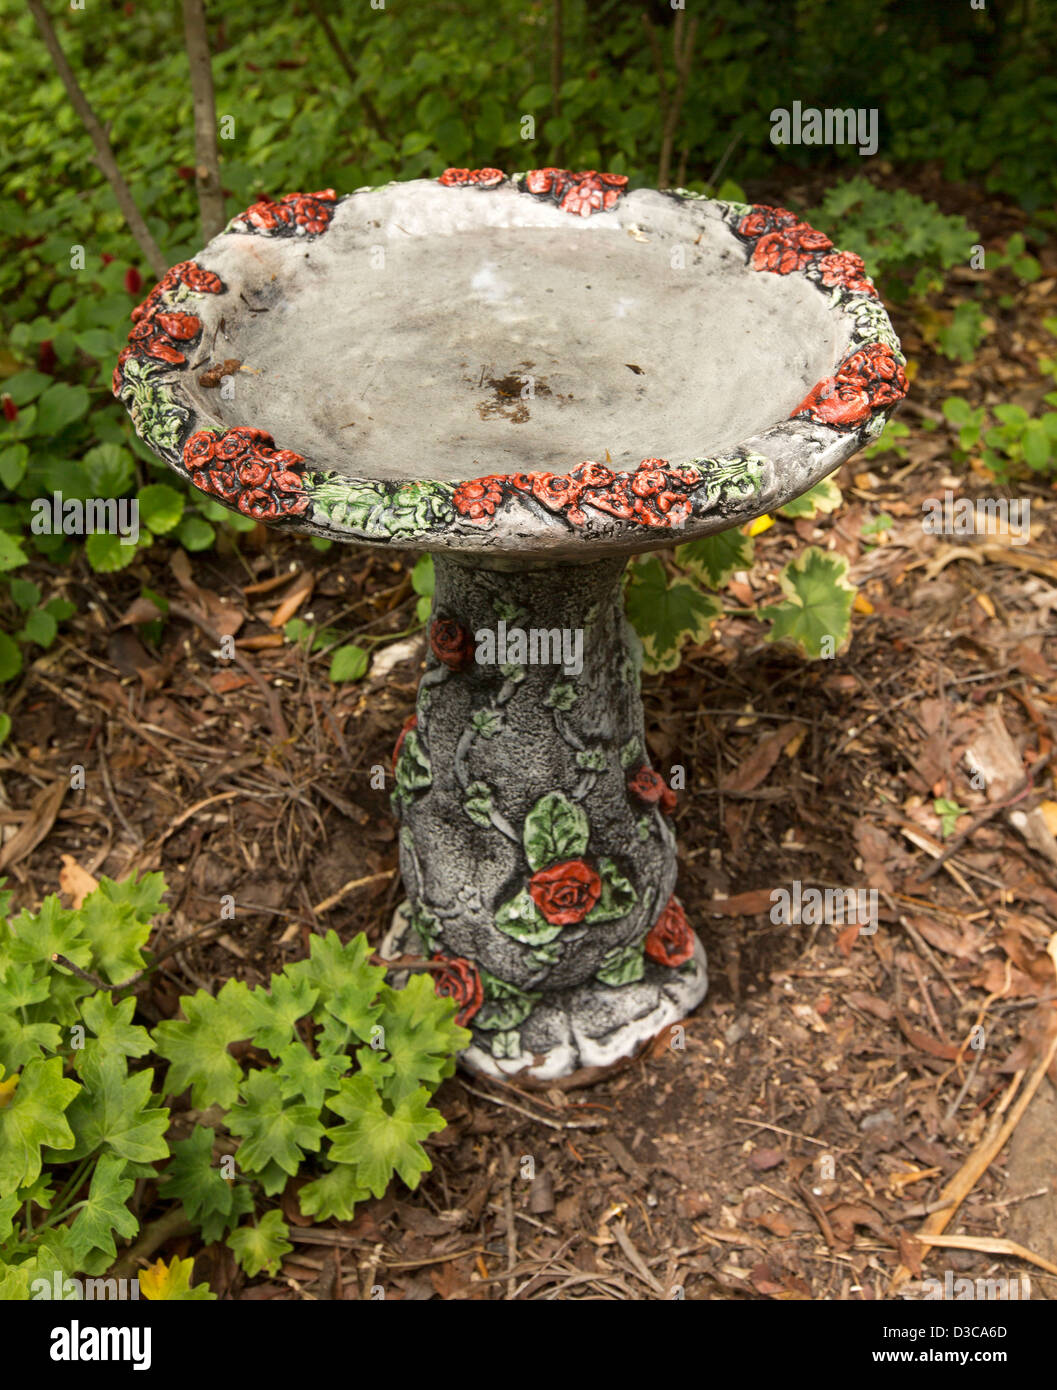 Unique and ornate bird bath decorated with red roses and green leaves in a garden setting Stock Photo